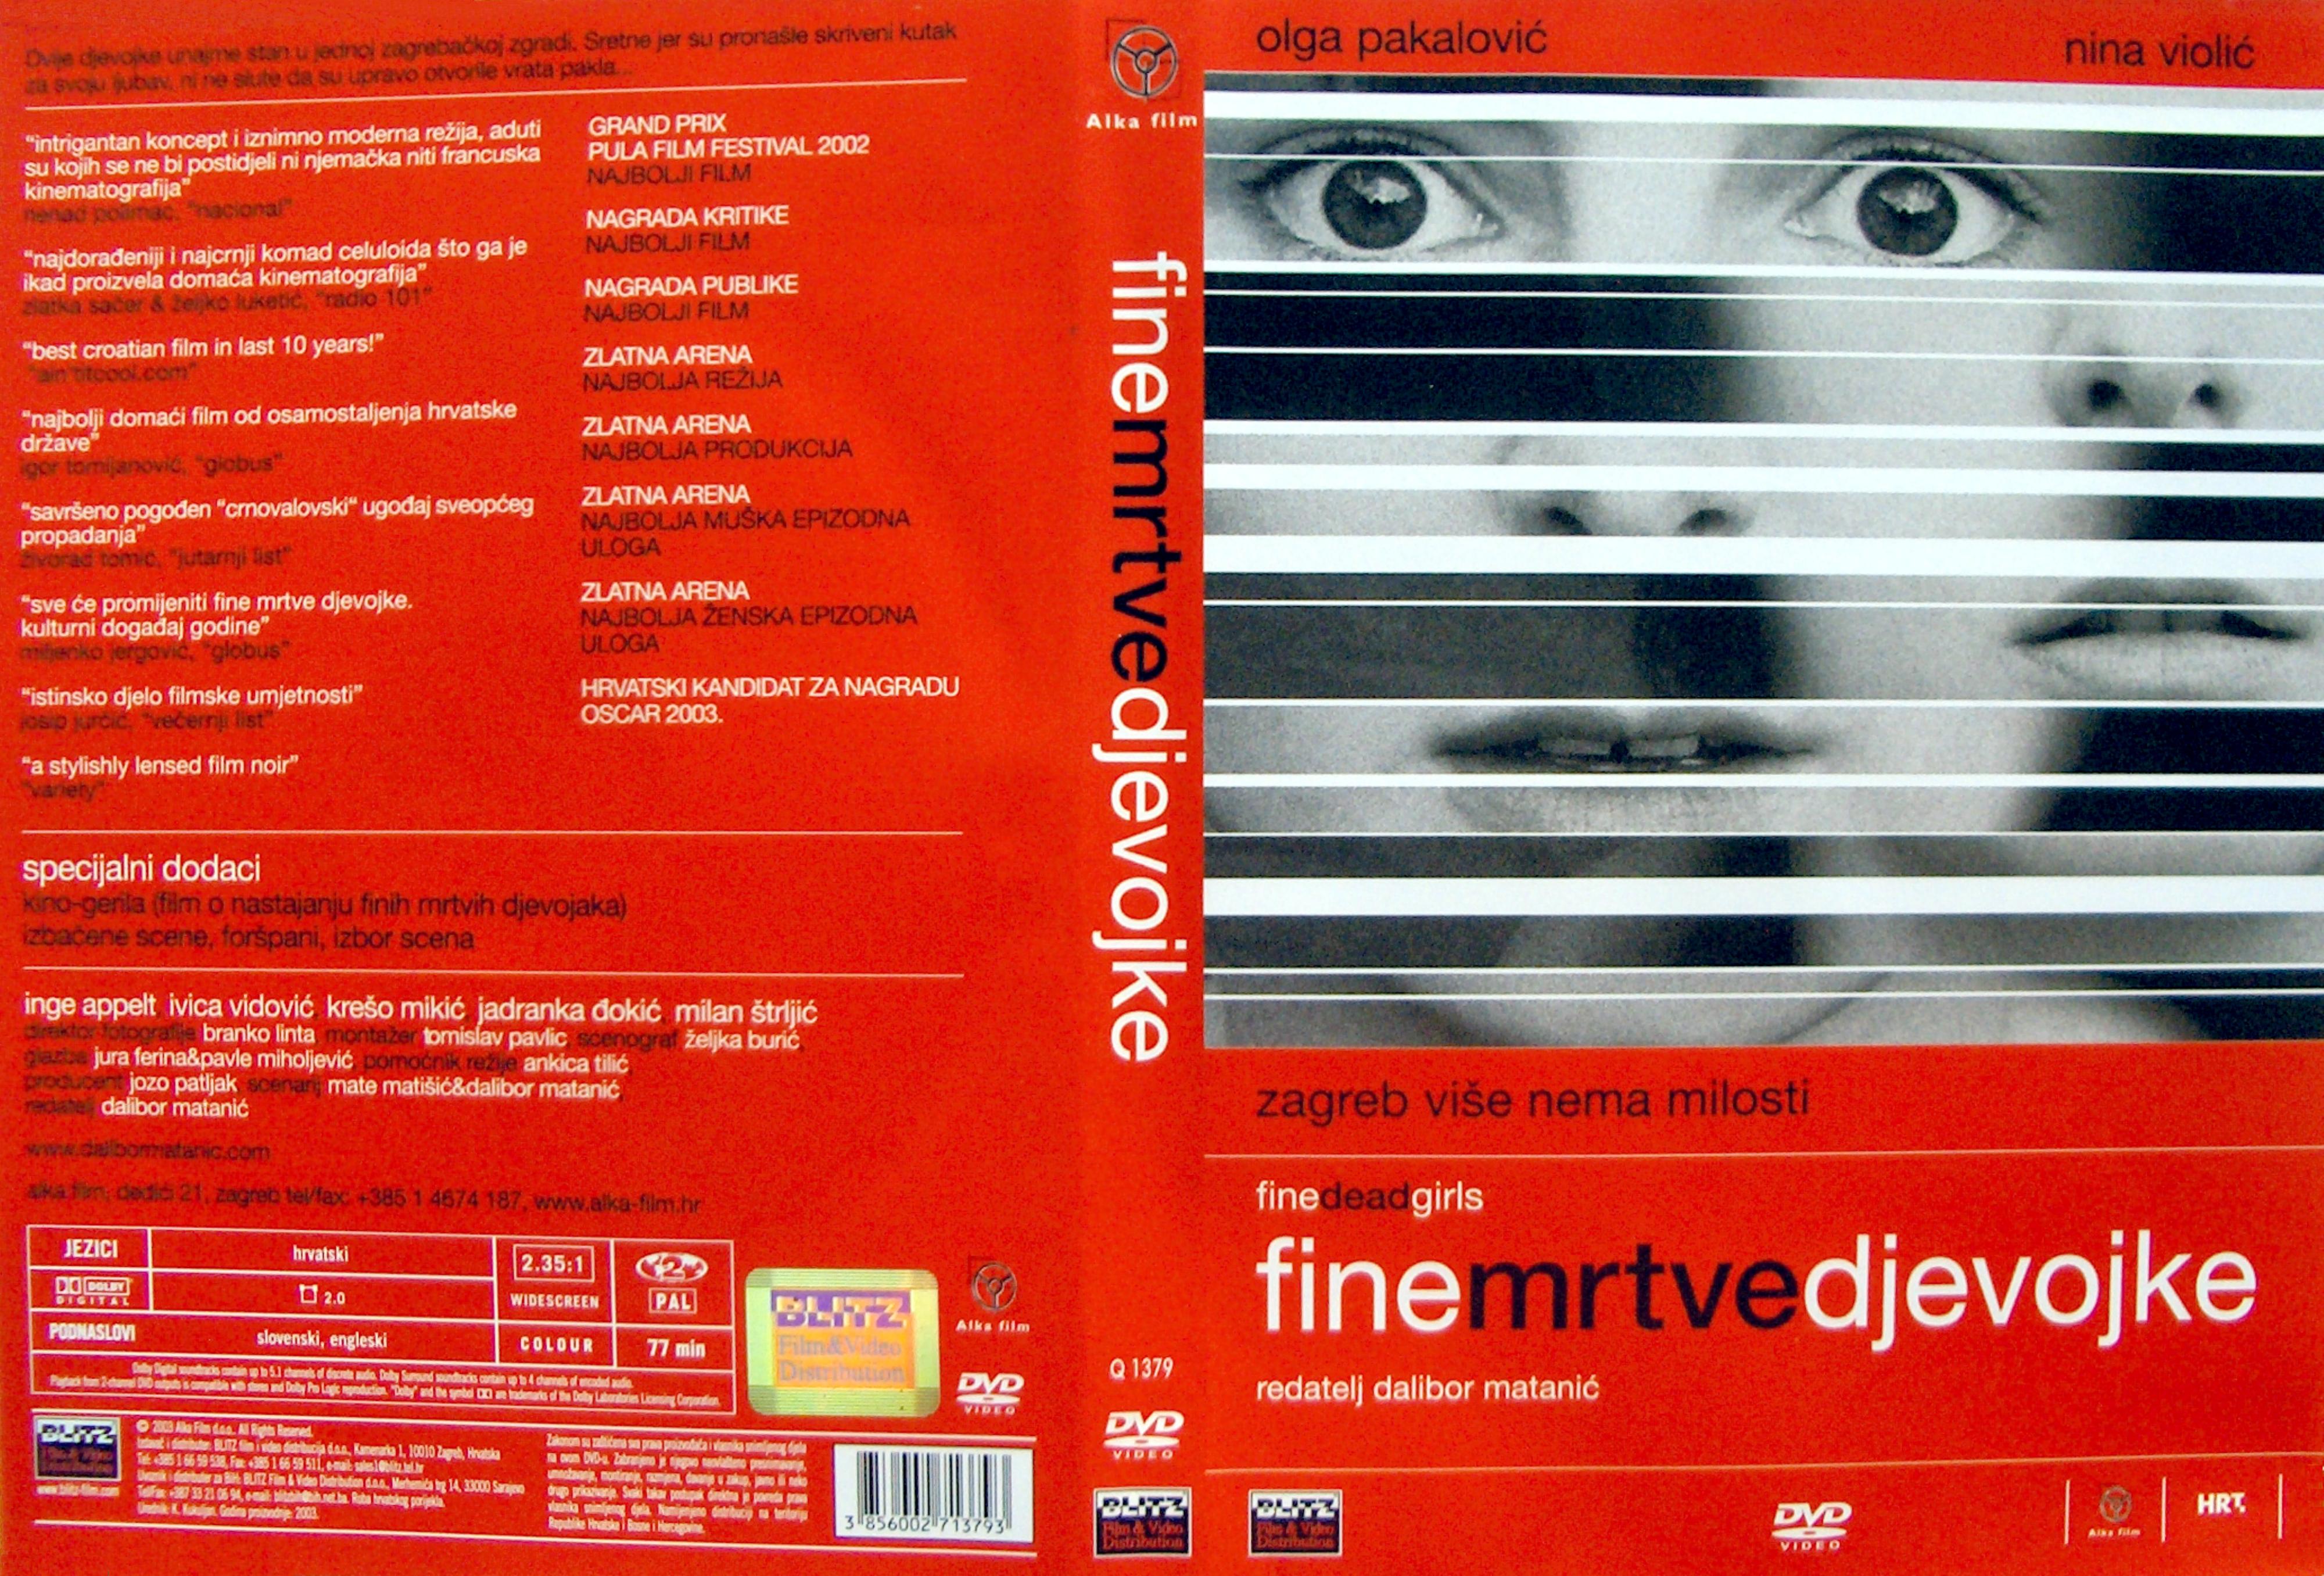 Click to view full size image -  DVD Cover - F - DVD - FINE MRTVE DJEVOJKE - DVD - FINE MRTVE DJEVOJKE.jpg